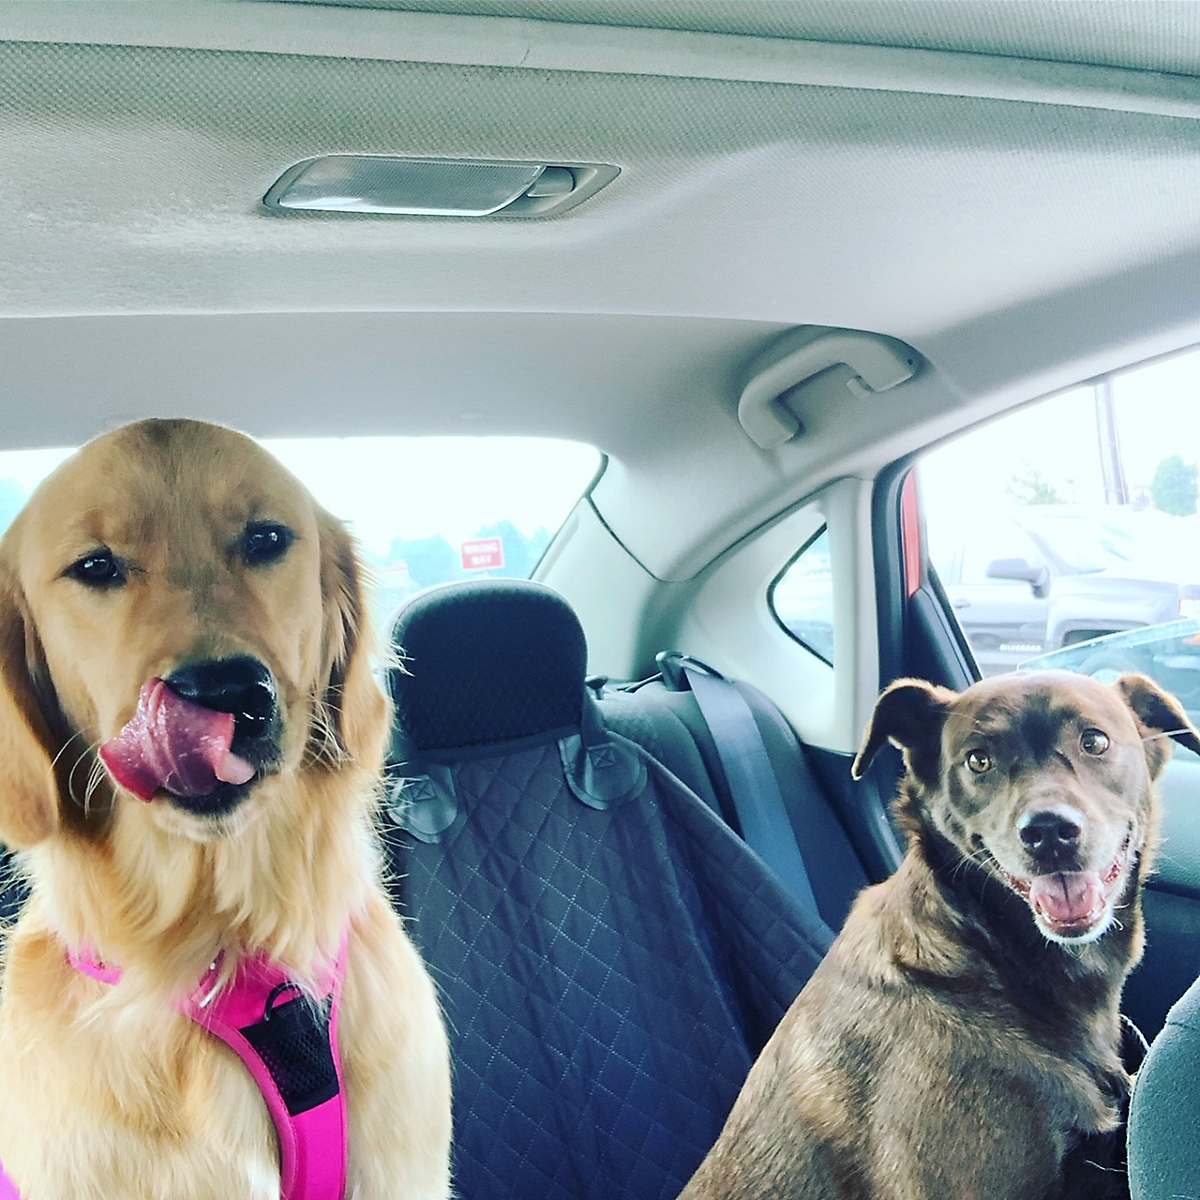 Golden retriever and Aussie mix dogs in a car